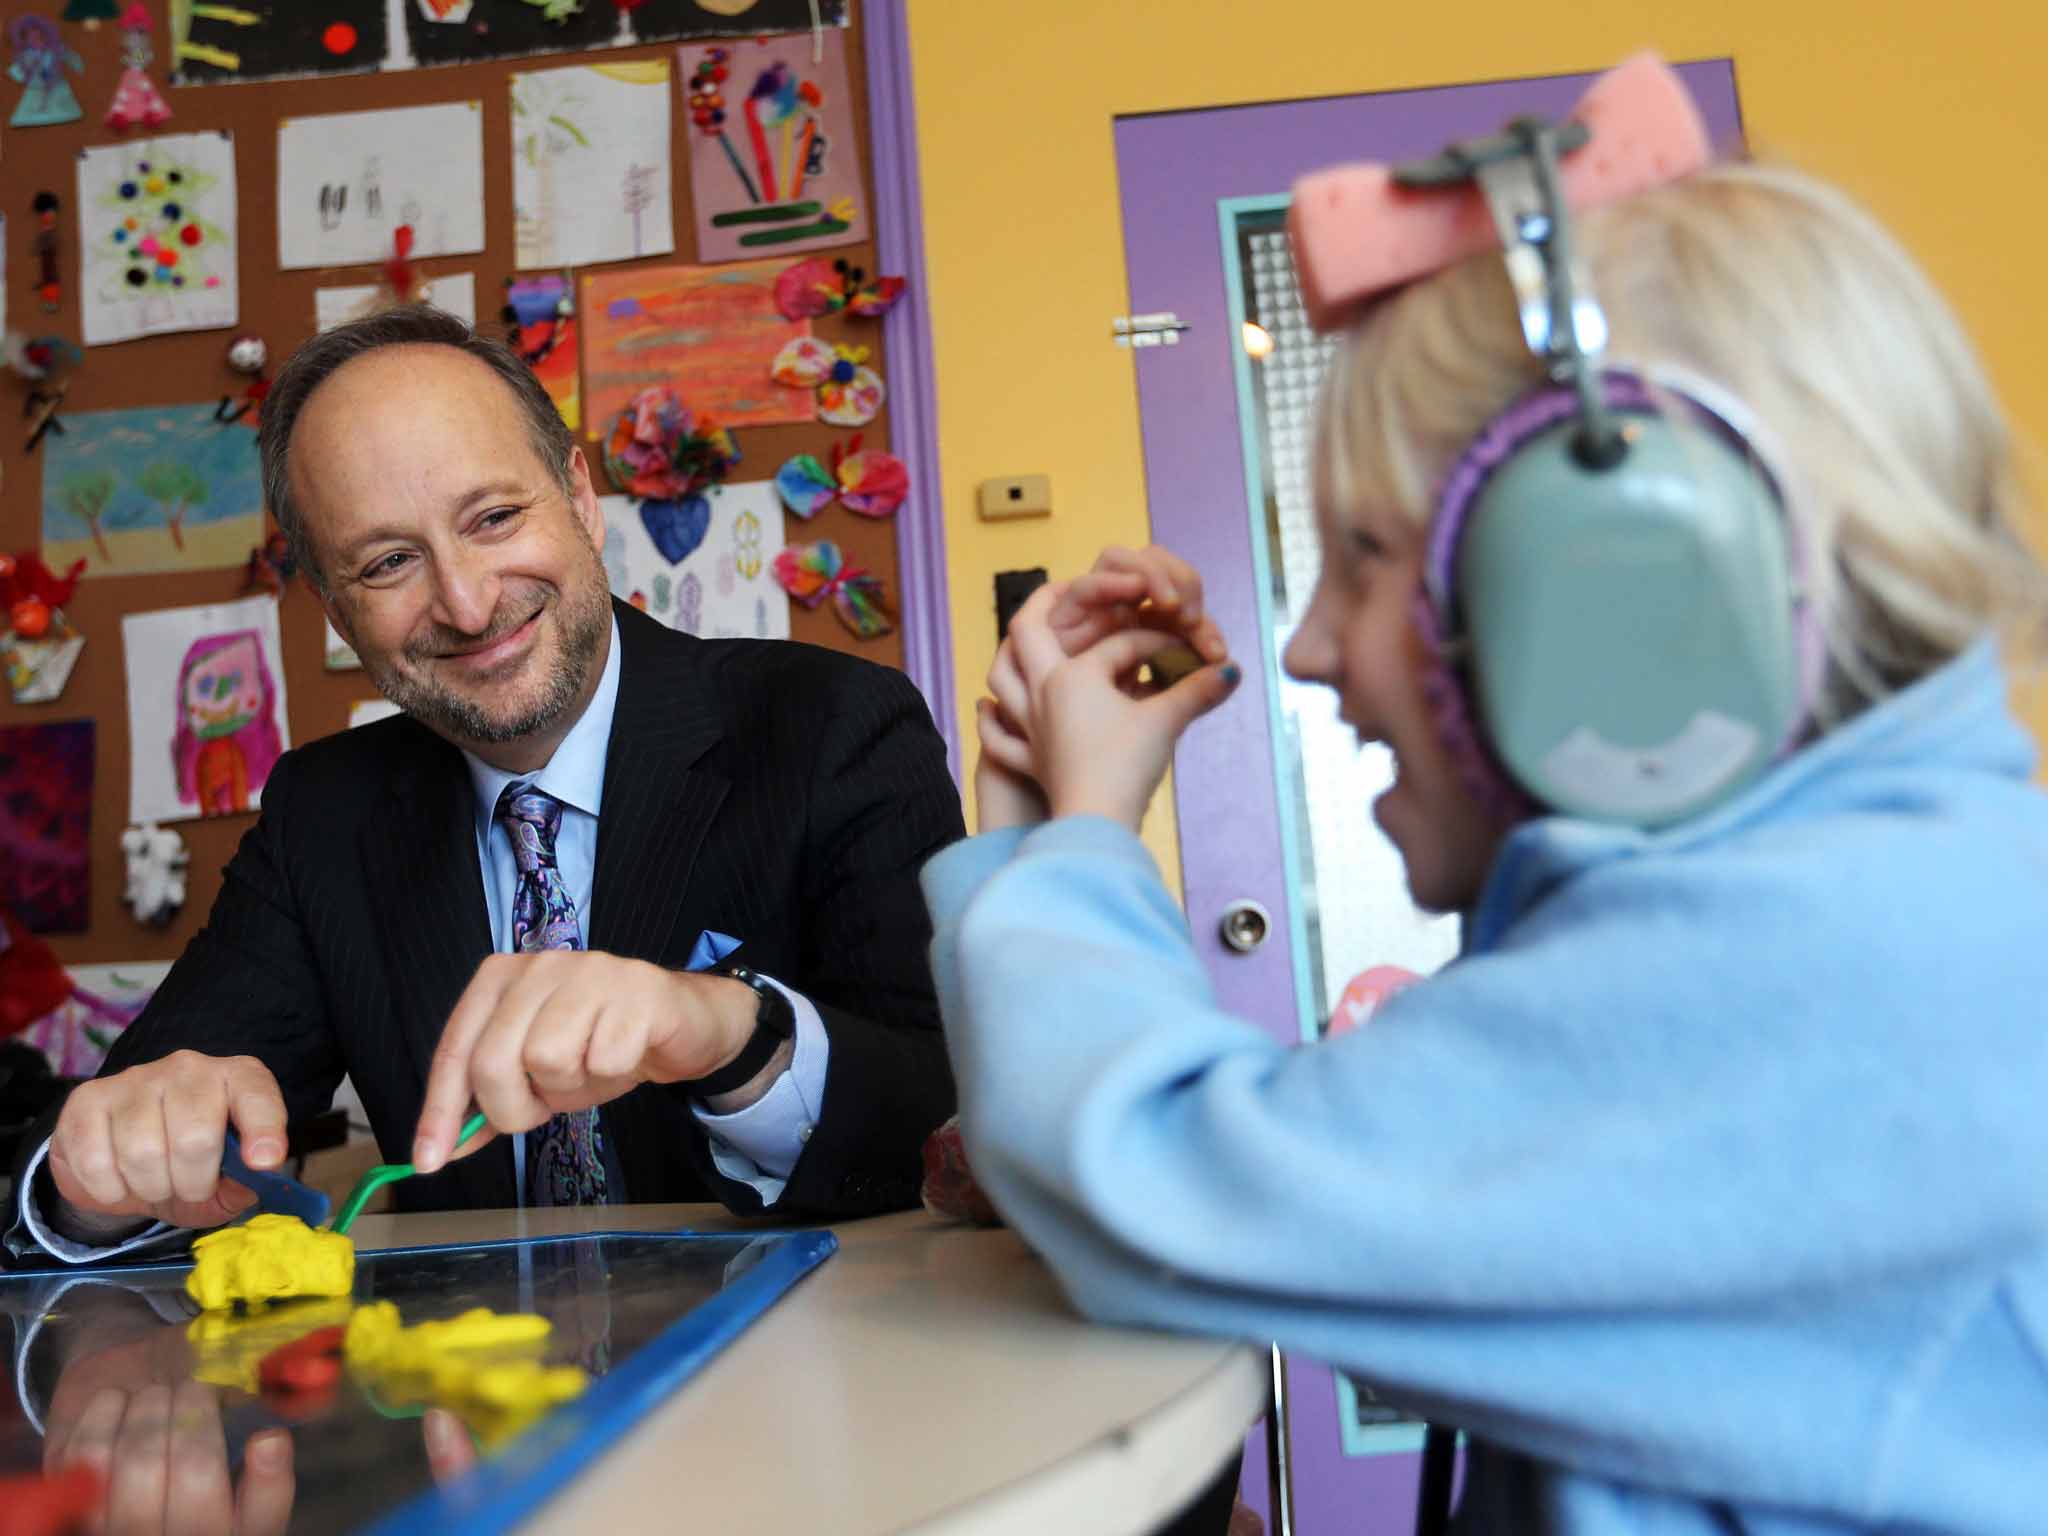 Dr Norman Doidge at The Learning Centre in Toronto, where a young patient is receiving brain stimulation